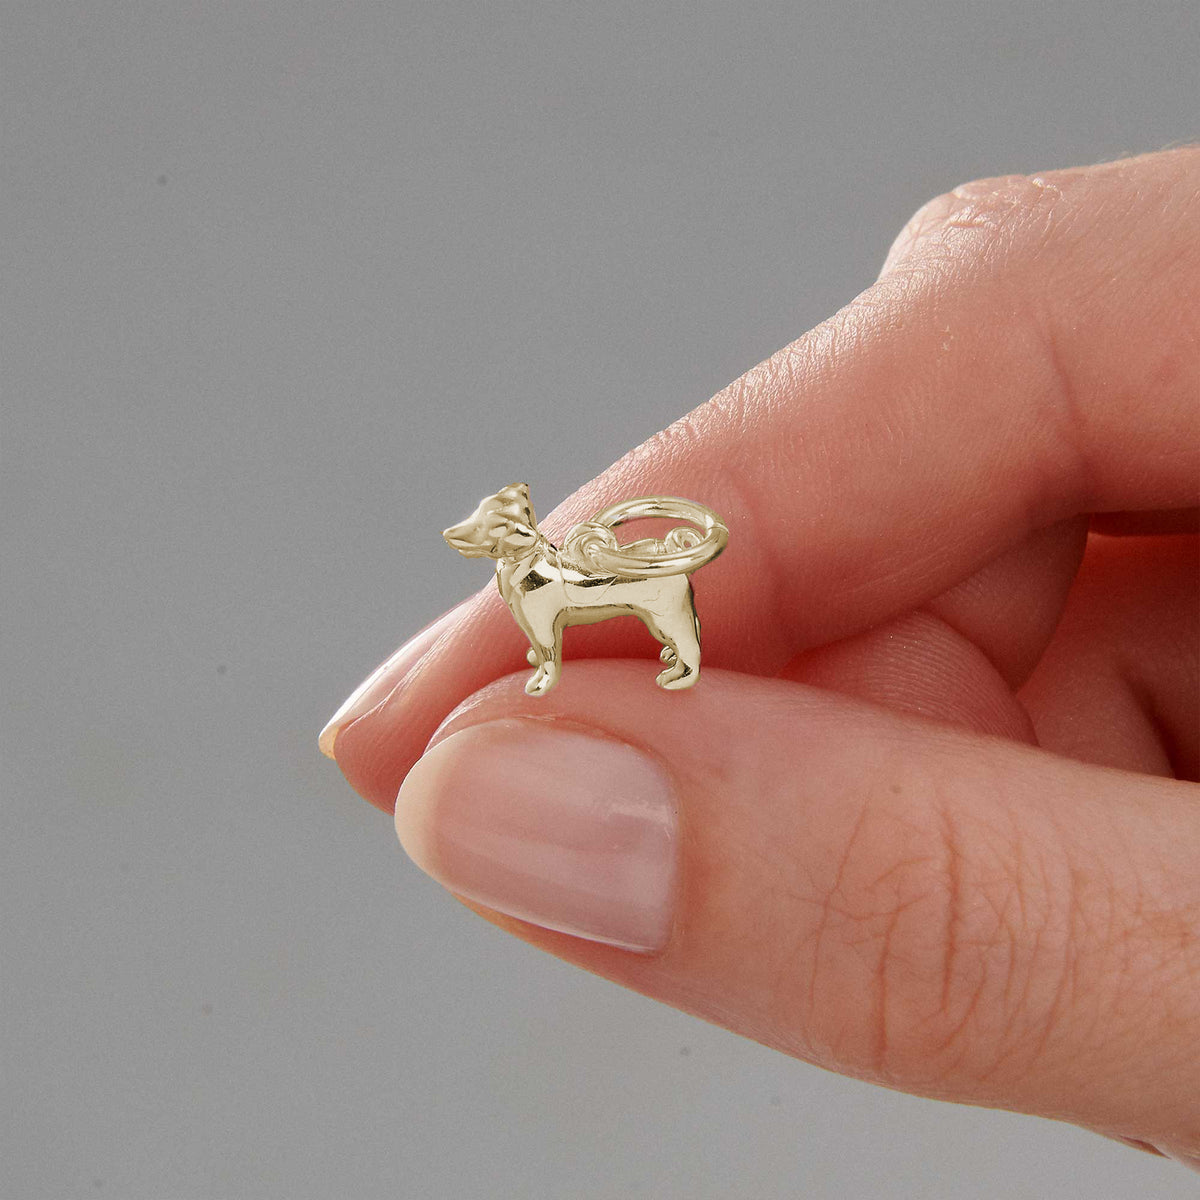 solid gold jack russell bracelet charm 9k 9ct gold dog charms scarlett jewellery